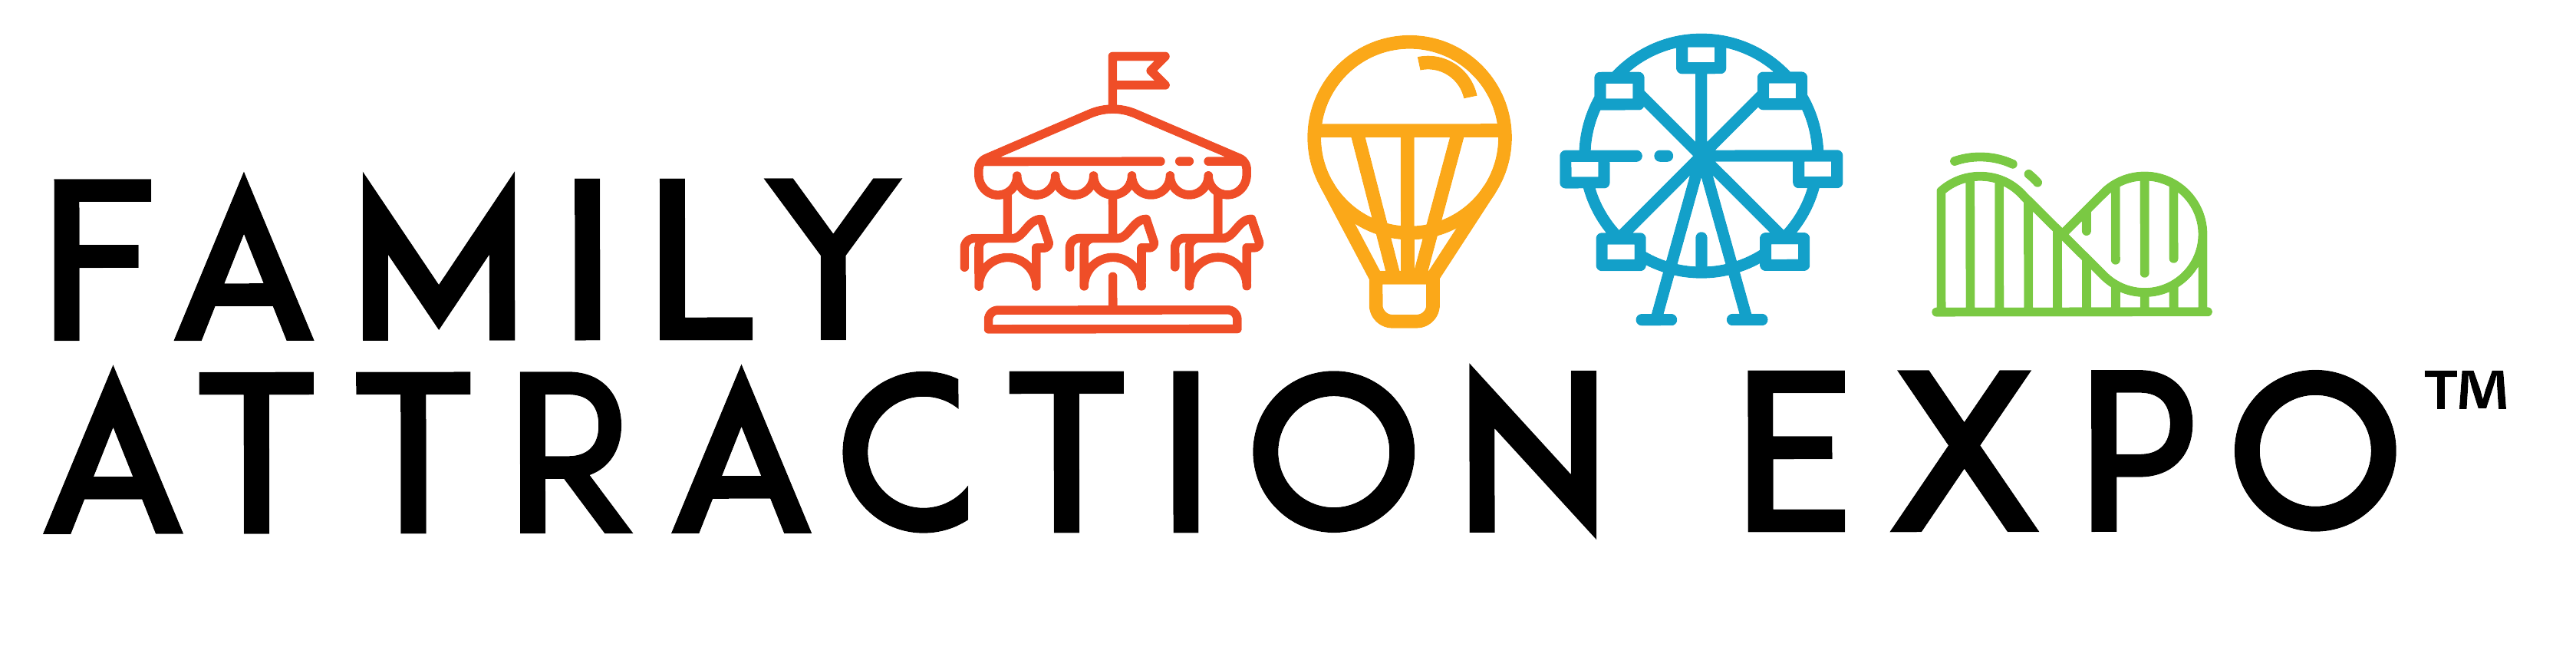 Family Attractions and Entertainment logo